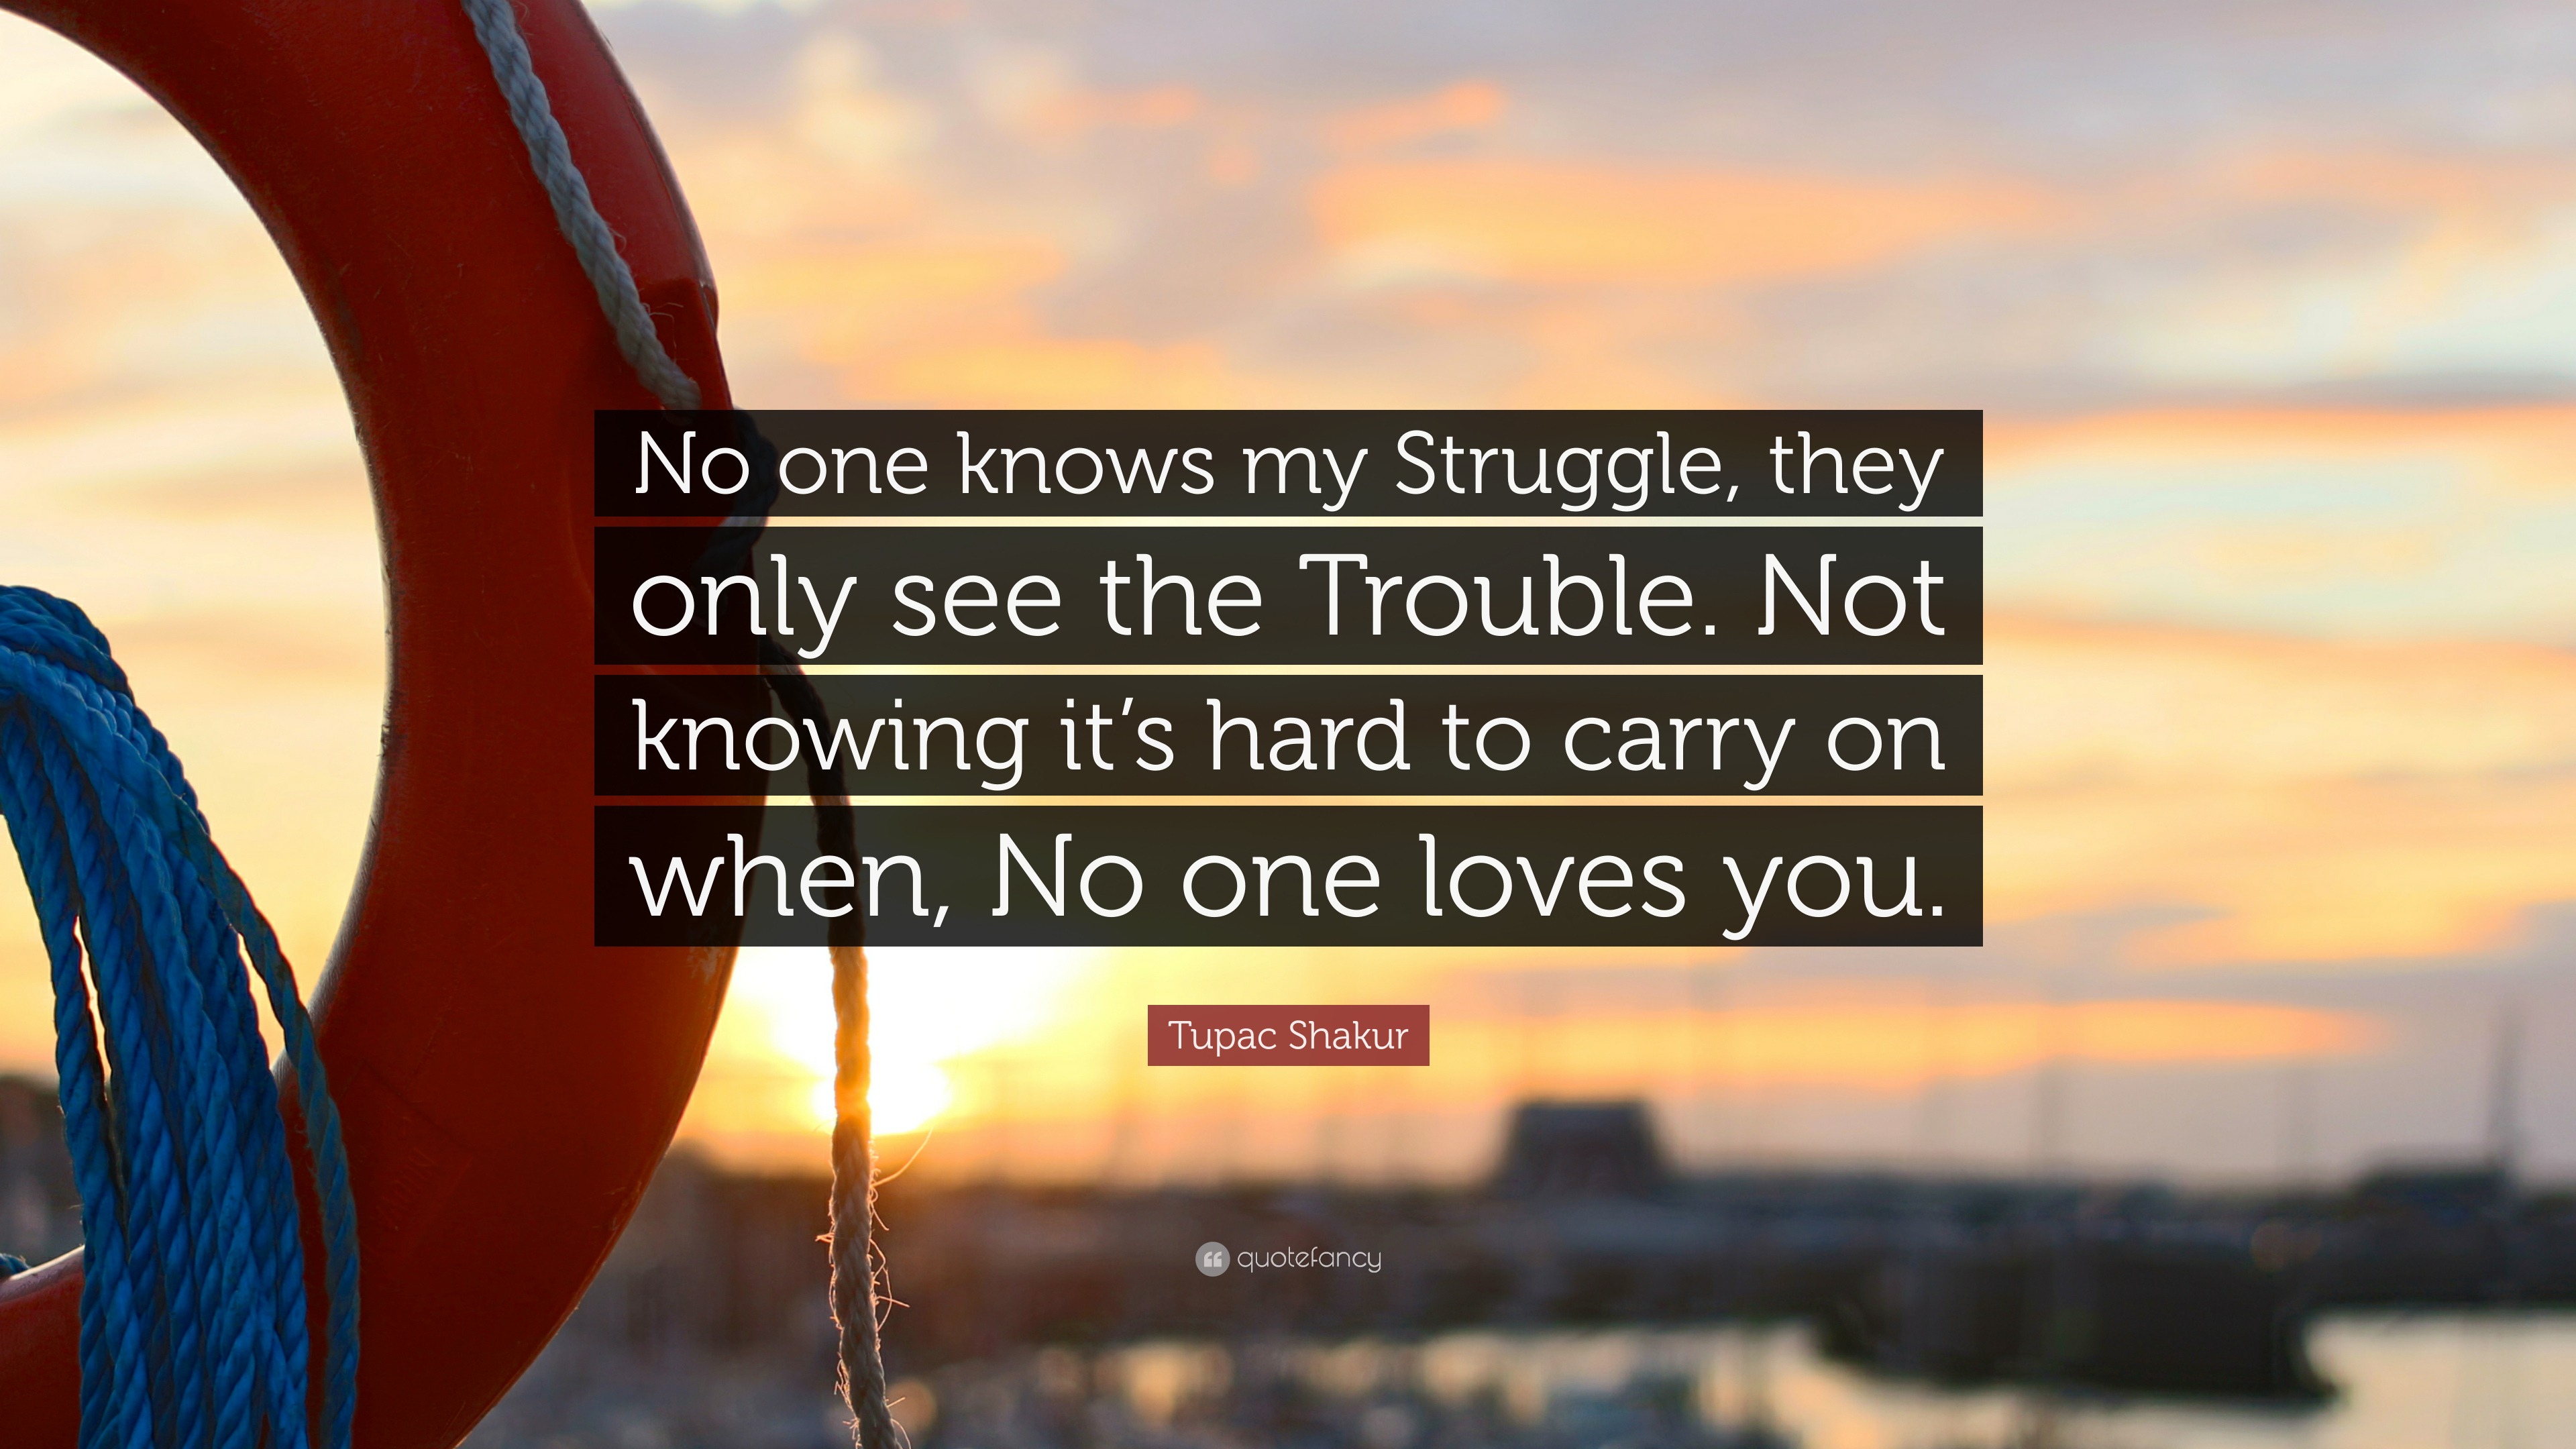 https://quotefancy.com/media/wallpaper/3840x2160/2043605-Tupac-Shakur-Quote-No-one-knows-my-Struggle-they-only-see-the.jpg